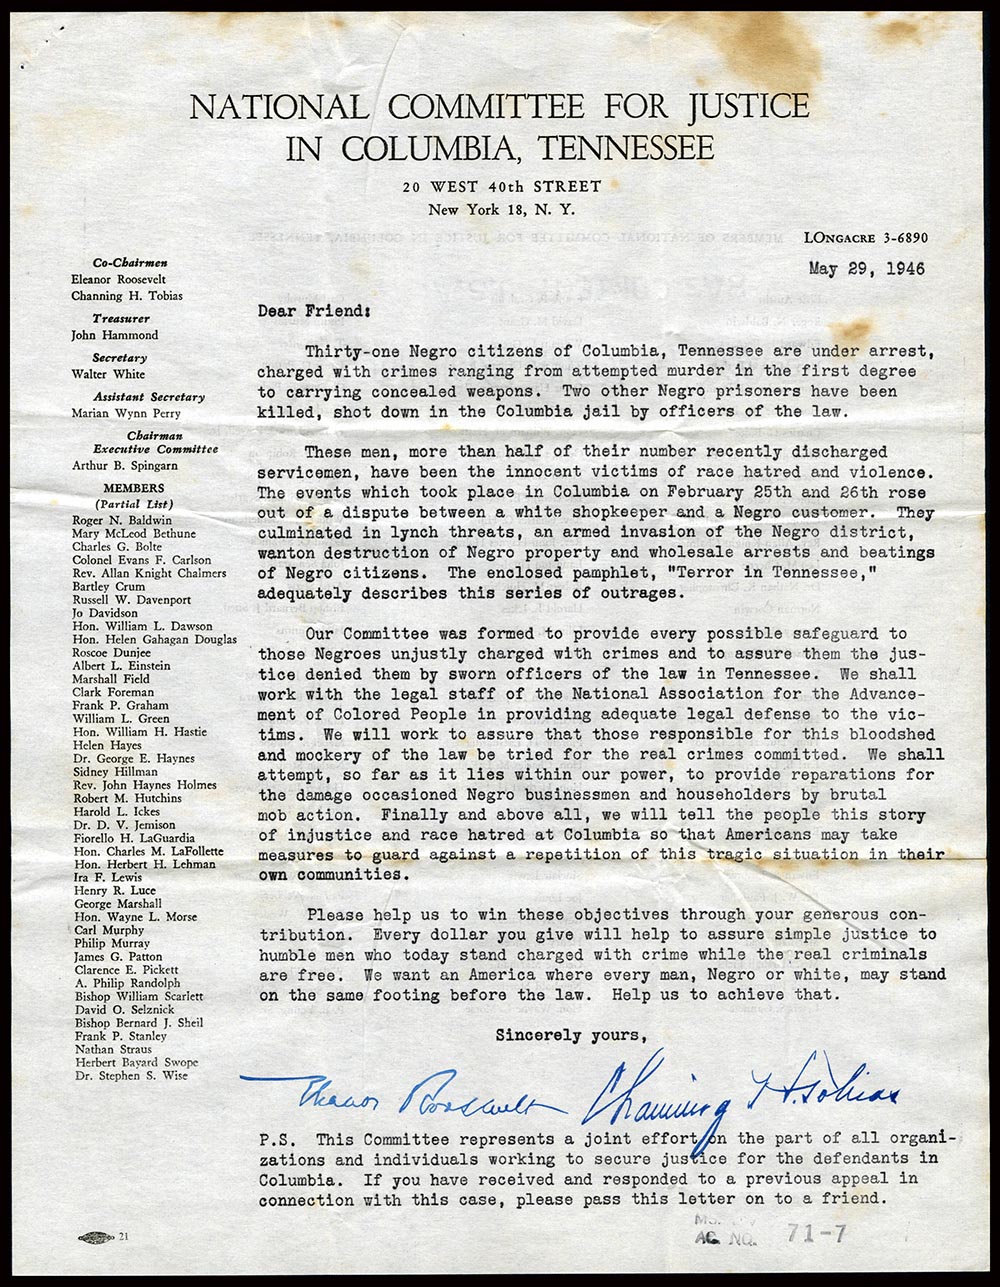 Signed by Eleanor Roosevelt, this letter advocated for funds to provide legal aid for African Americans involved in the Columbia Race Riot.